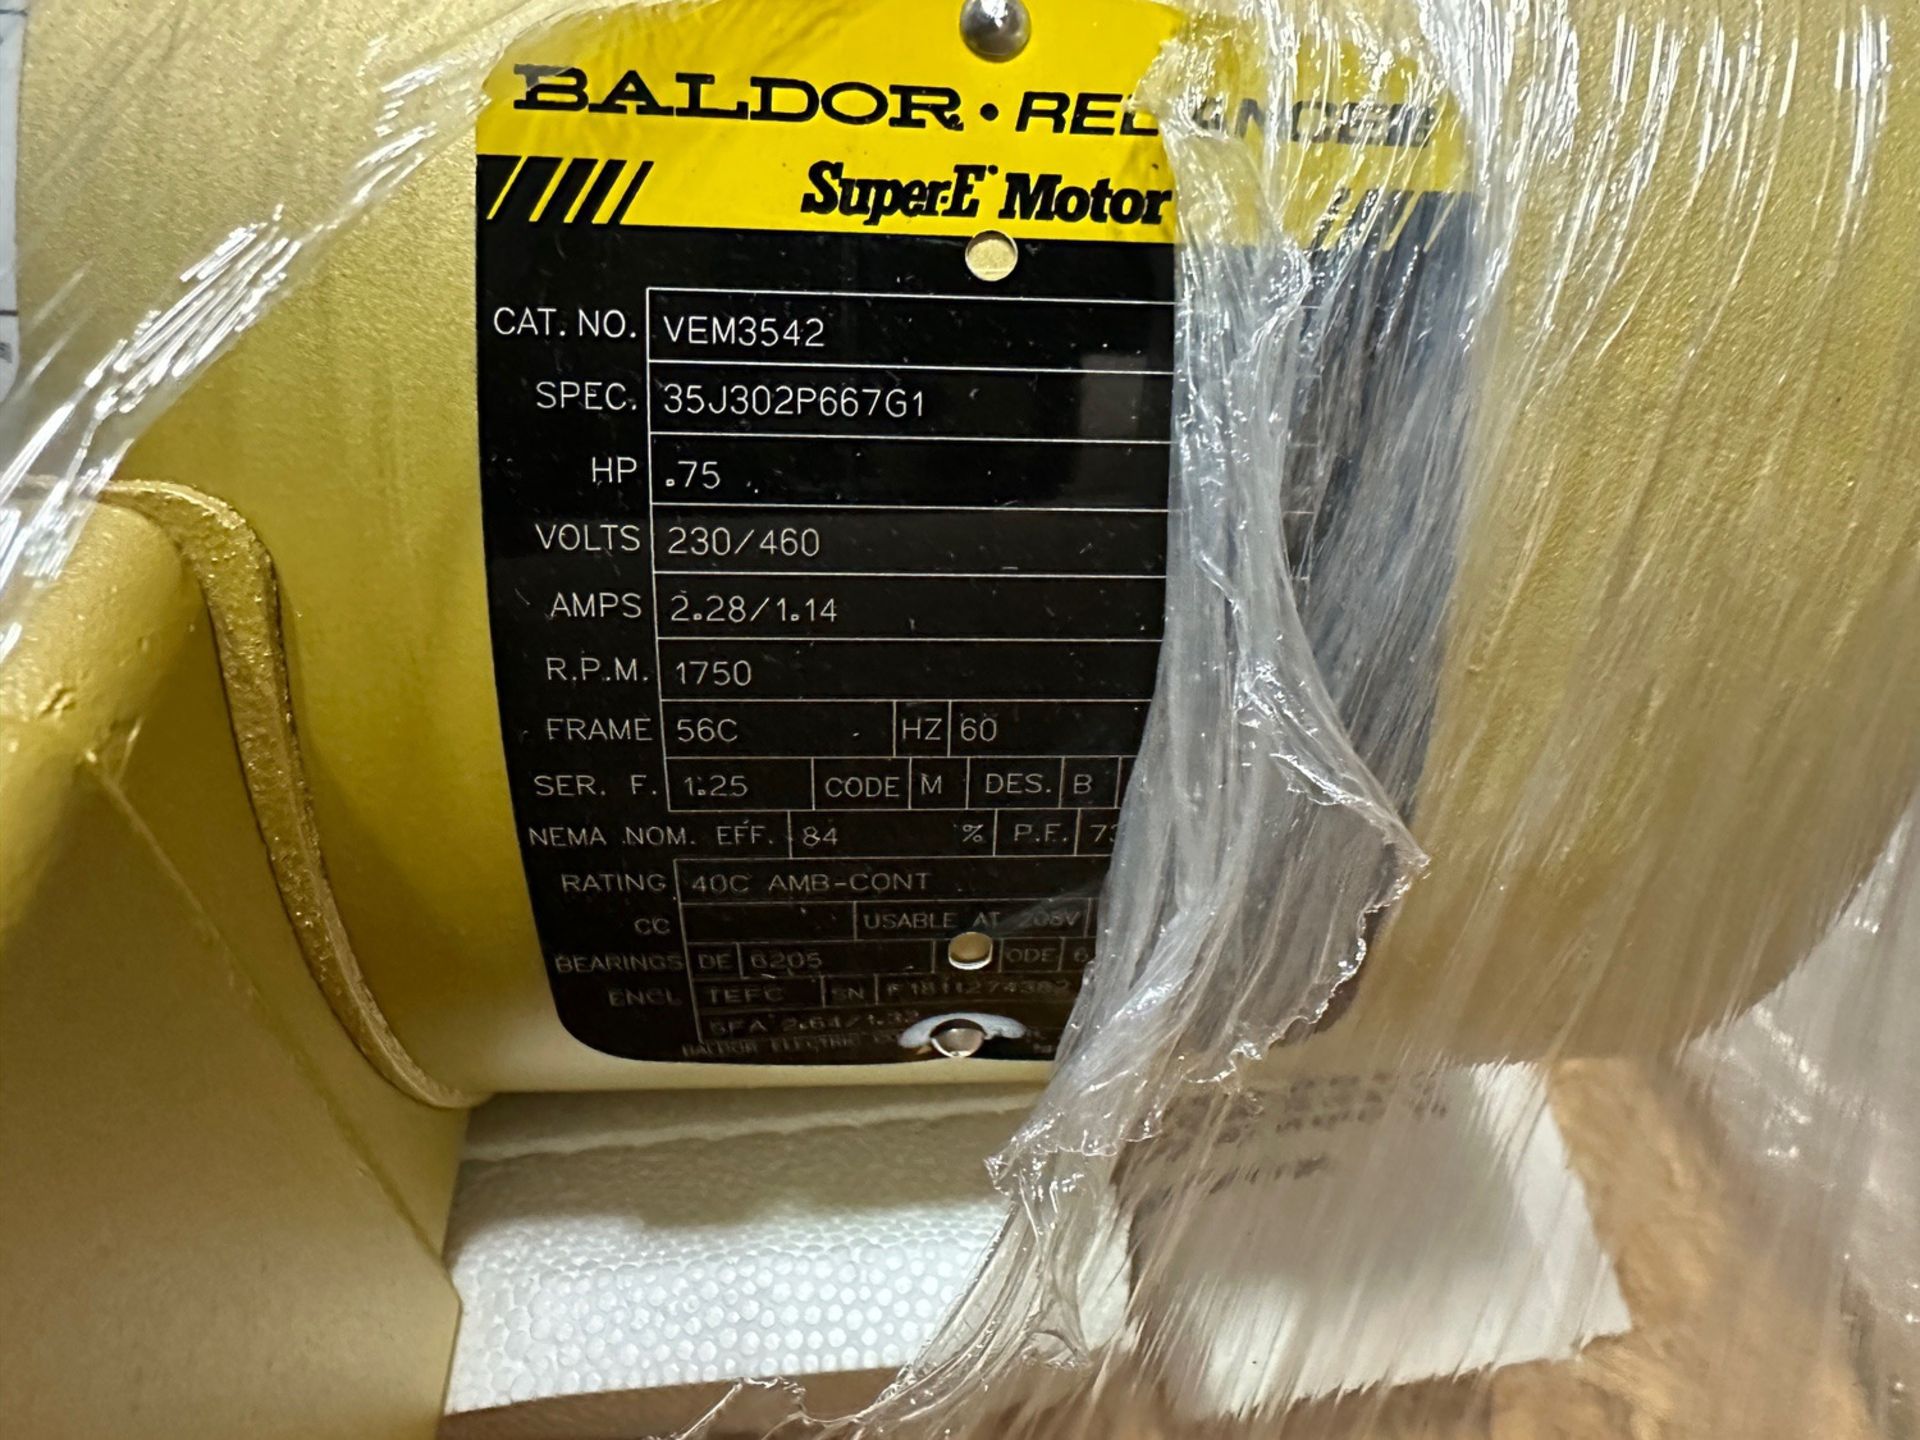 Baldor Reliance .75 HP Super-E Industrial Motor (Brand New) | Rig Fee $10 - Image 2 of 2